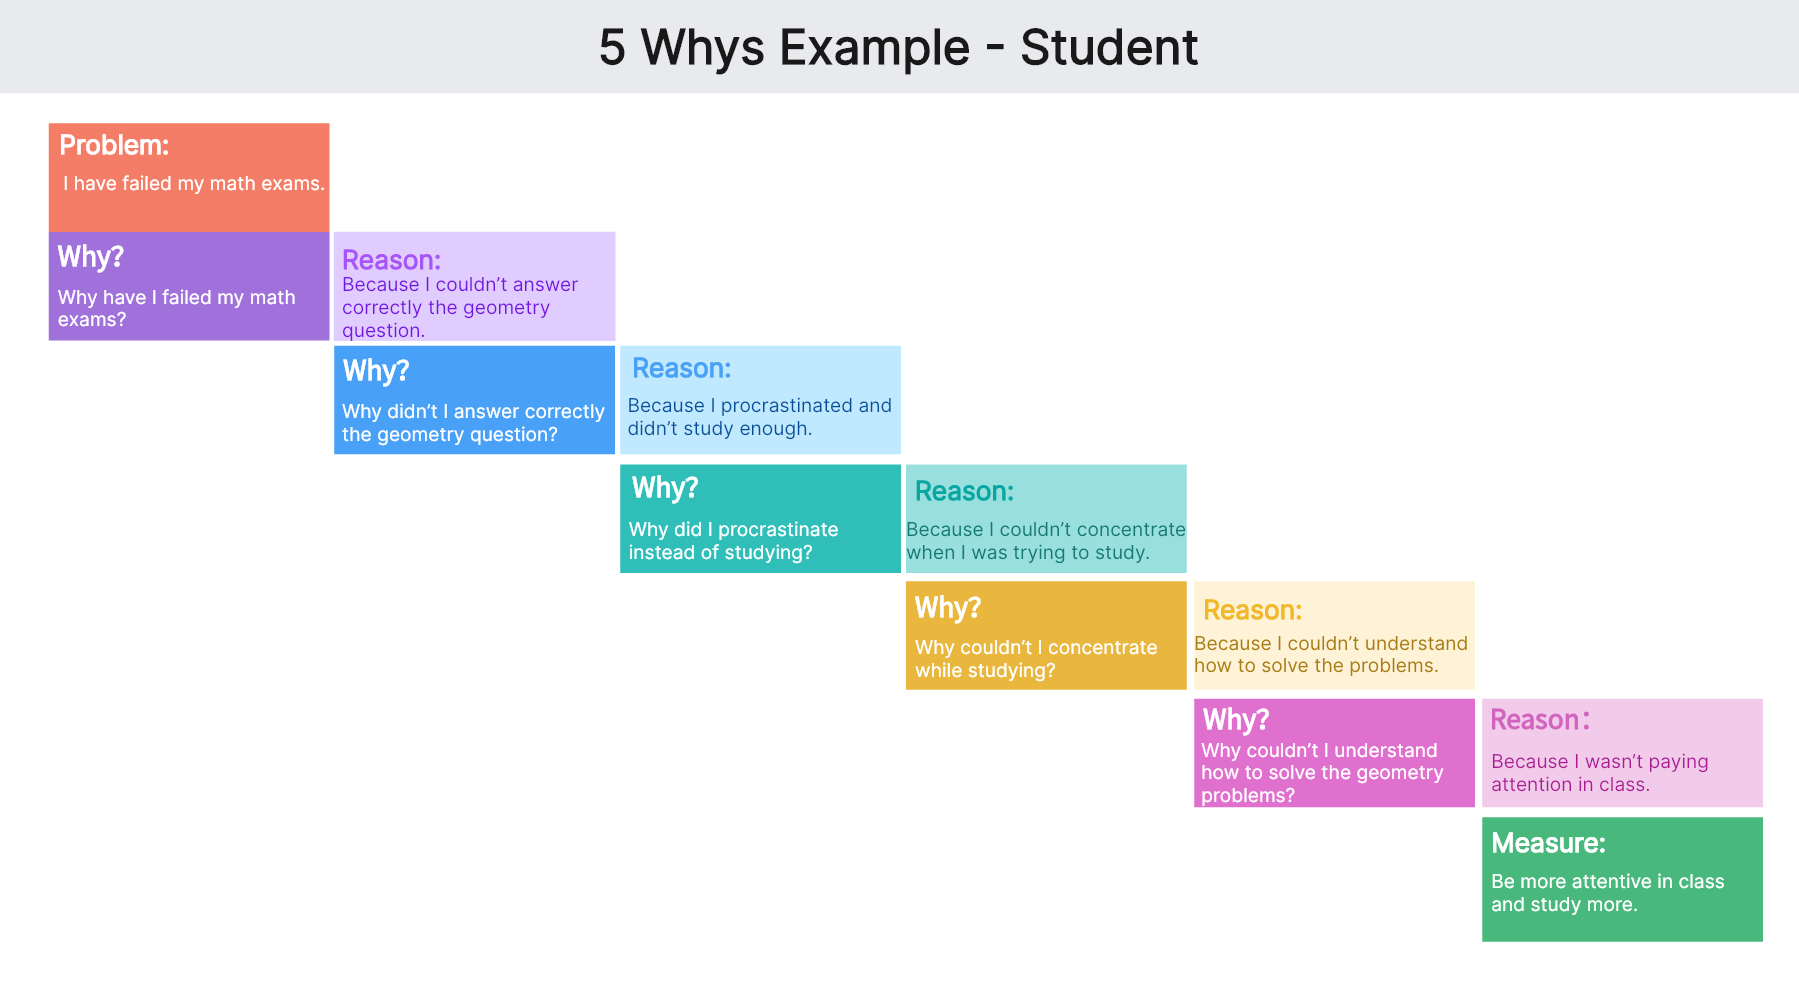 5 whys example student